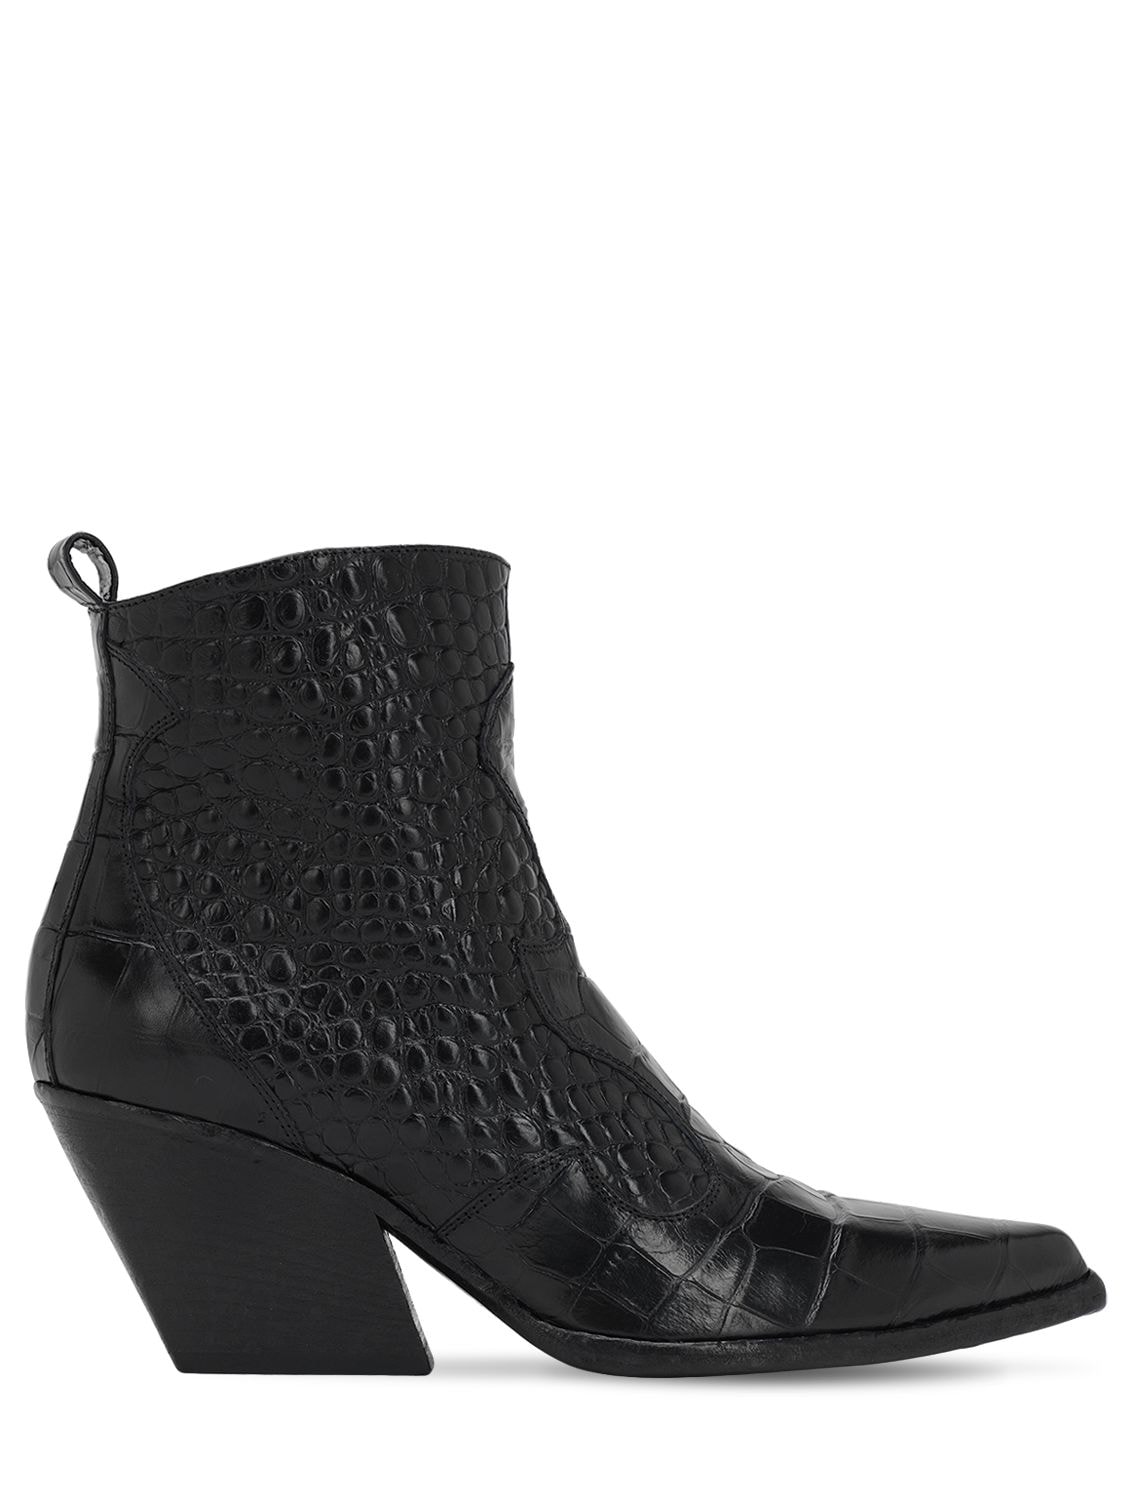 Elena Iachi 70mm Croc Embossed Leather Boots In Black